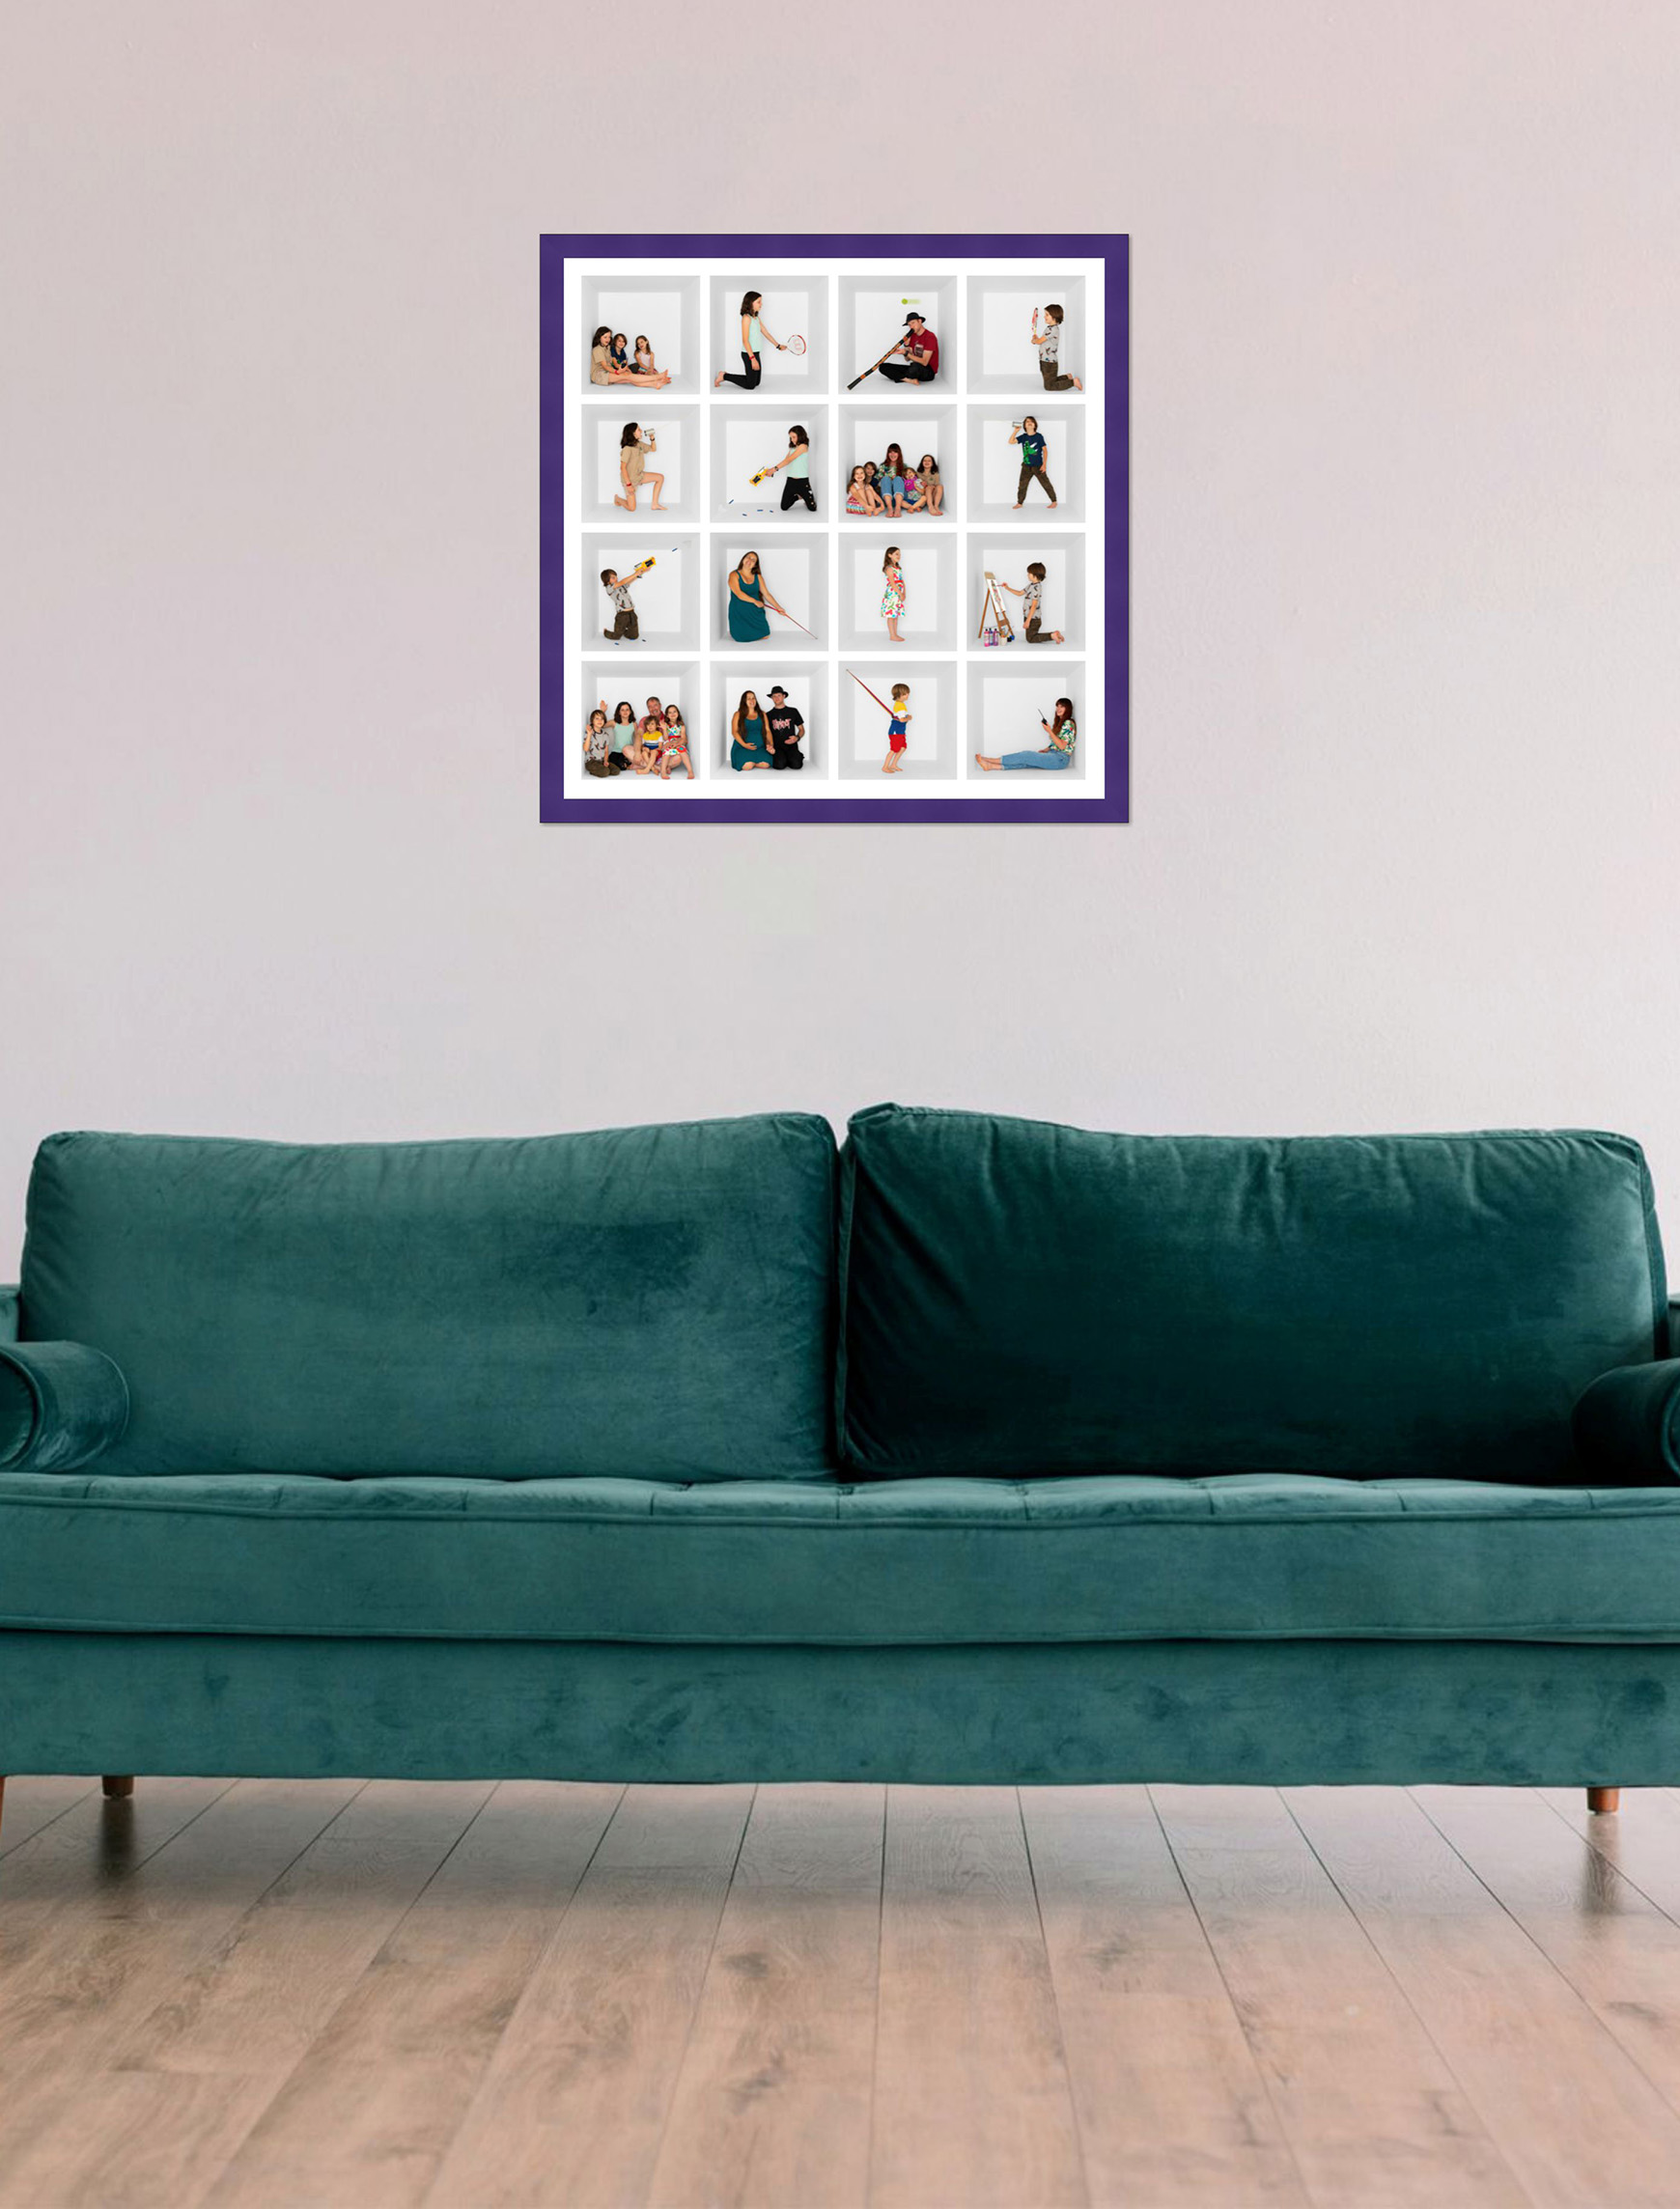 Image of a 16 box with purple frame